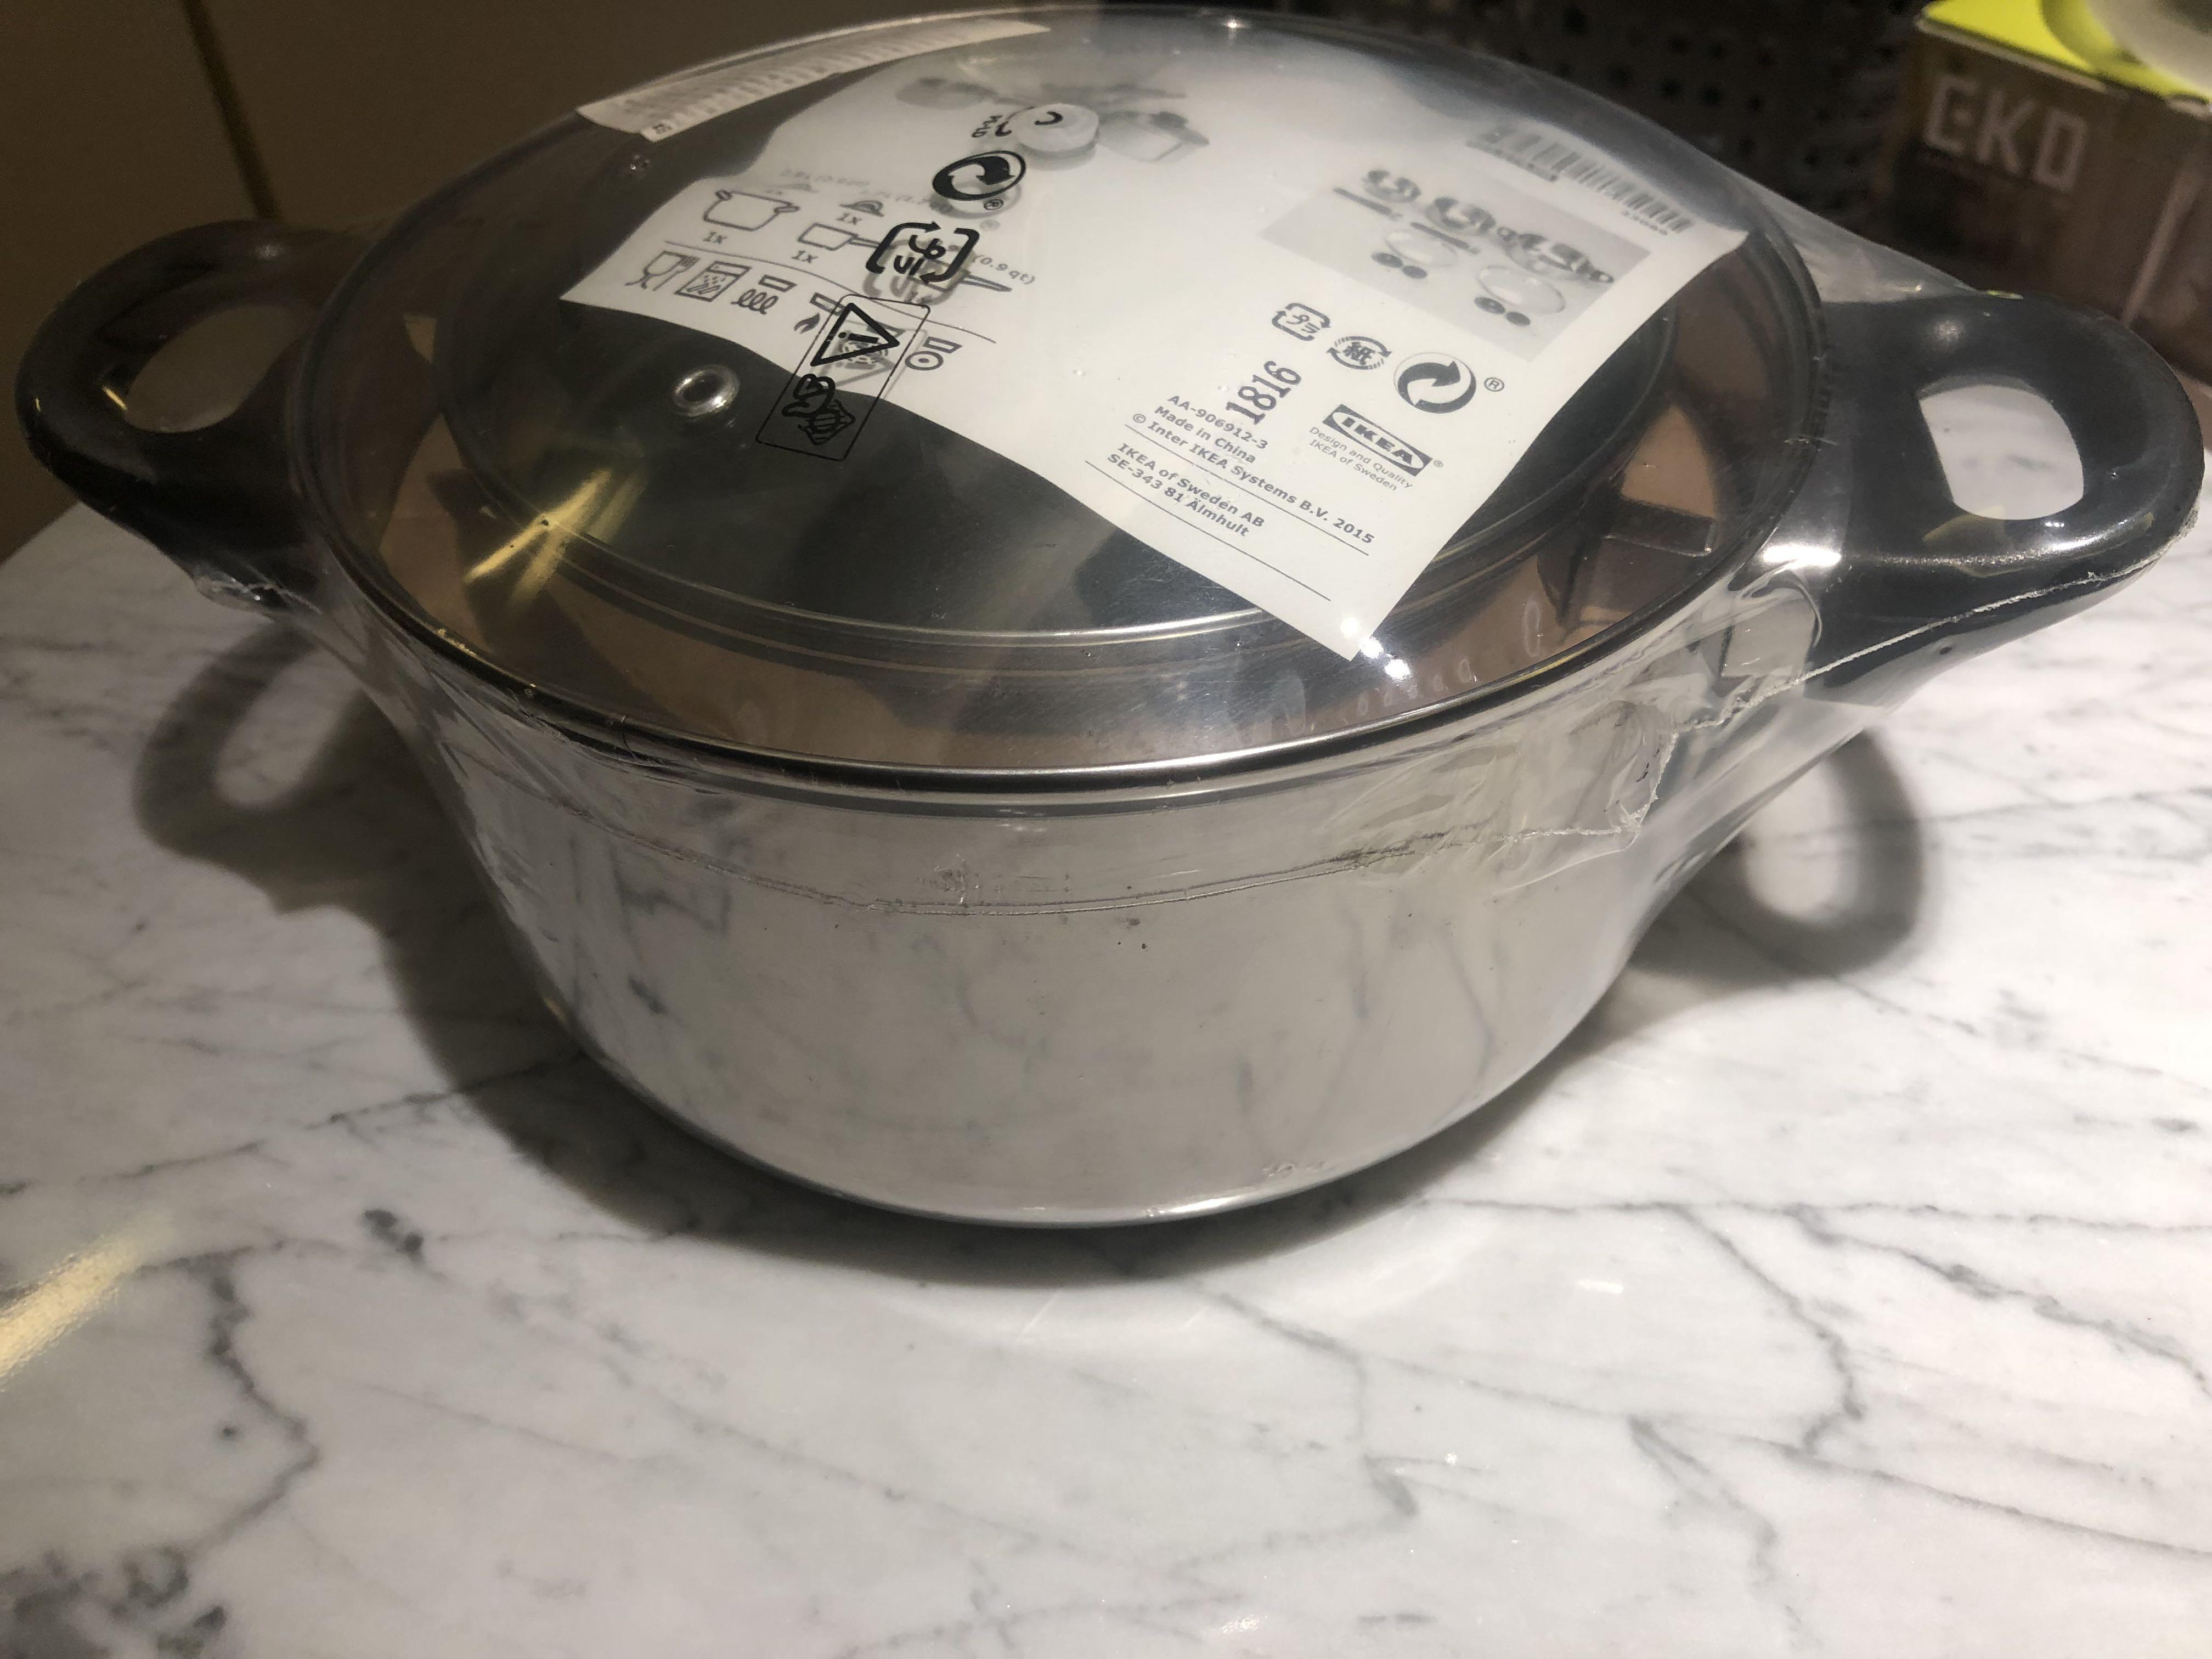 ANNONS Pot with lid, glass/stainless steel, 3.0 qt - IKEA